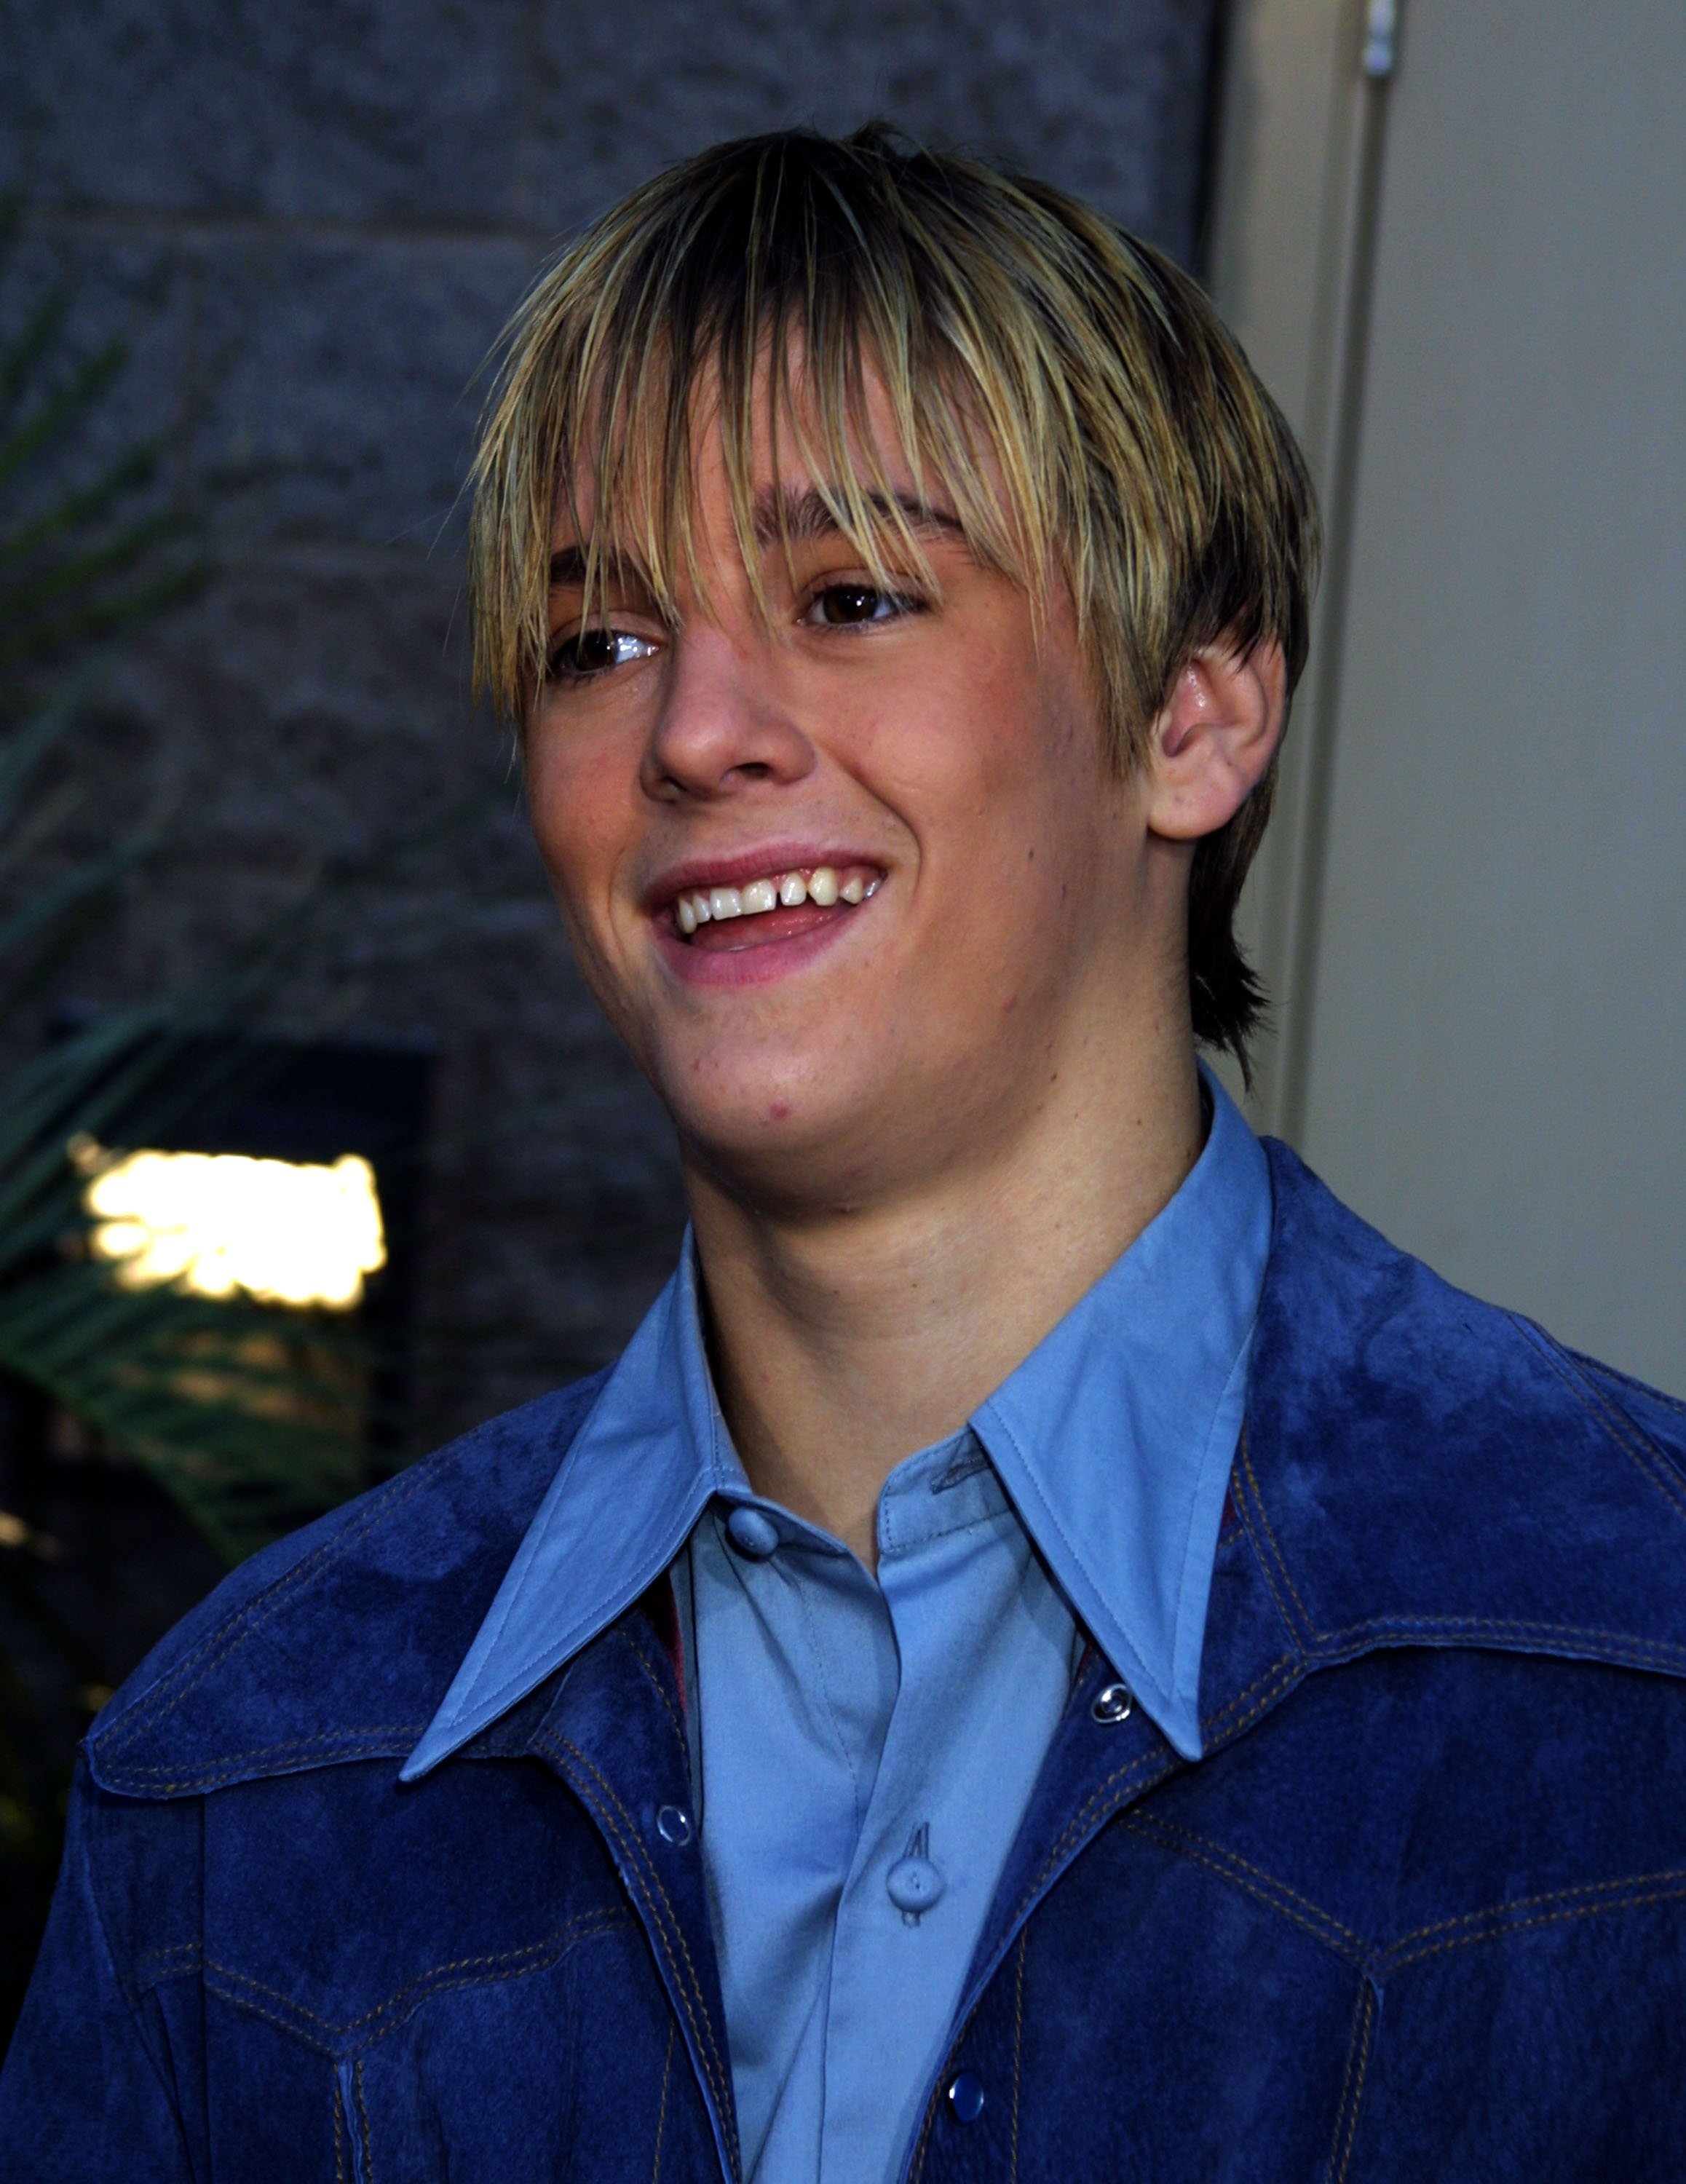 Aaron Carter arriving at the 2001 Billboard Music Awards in Las Vegas | Source: Getty Images 